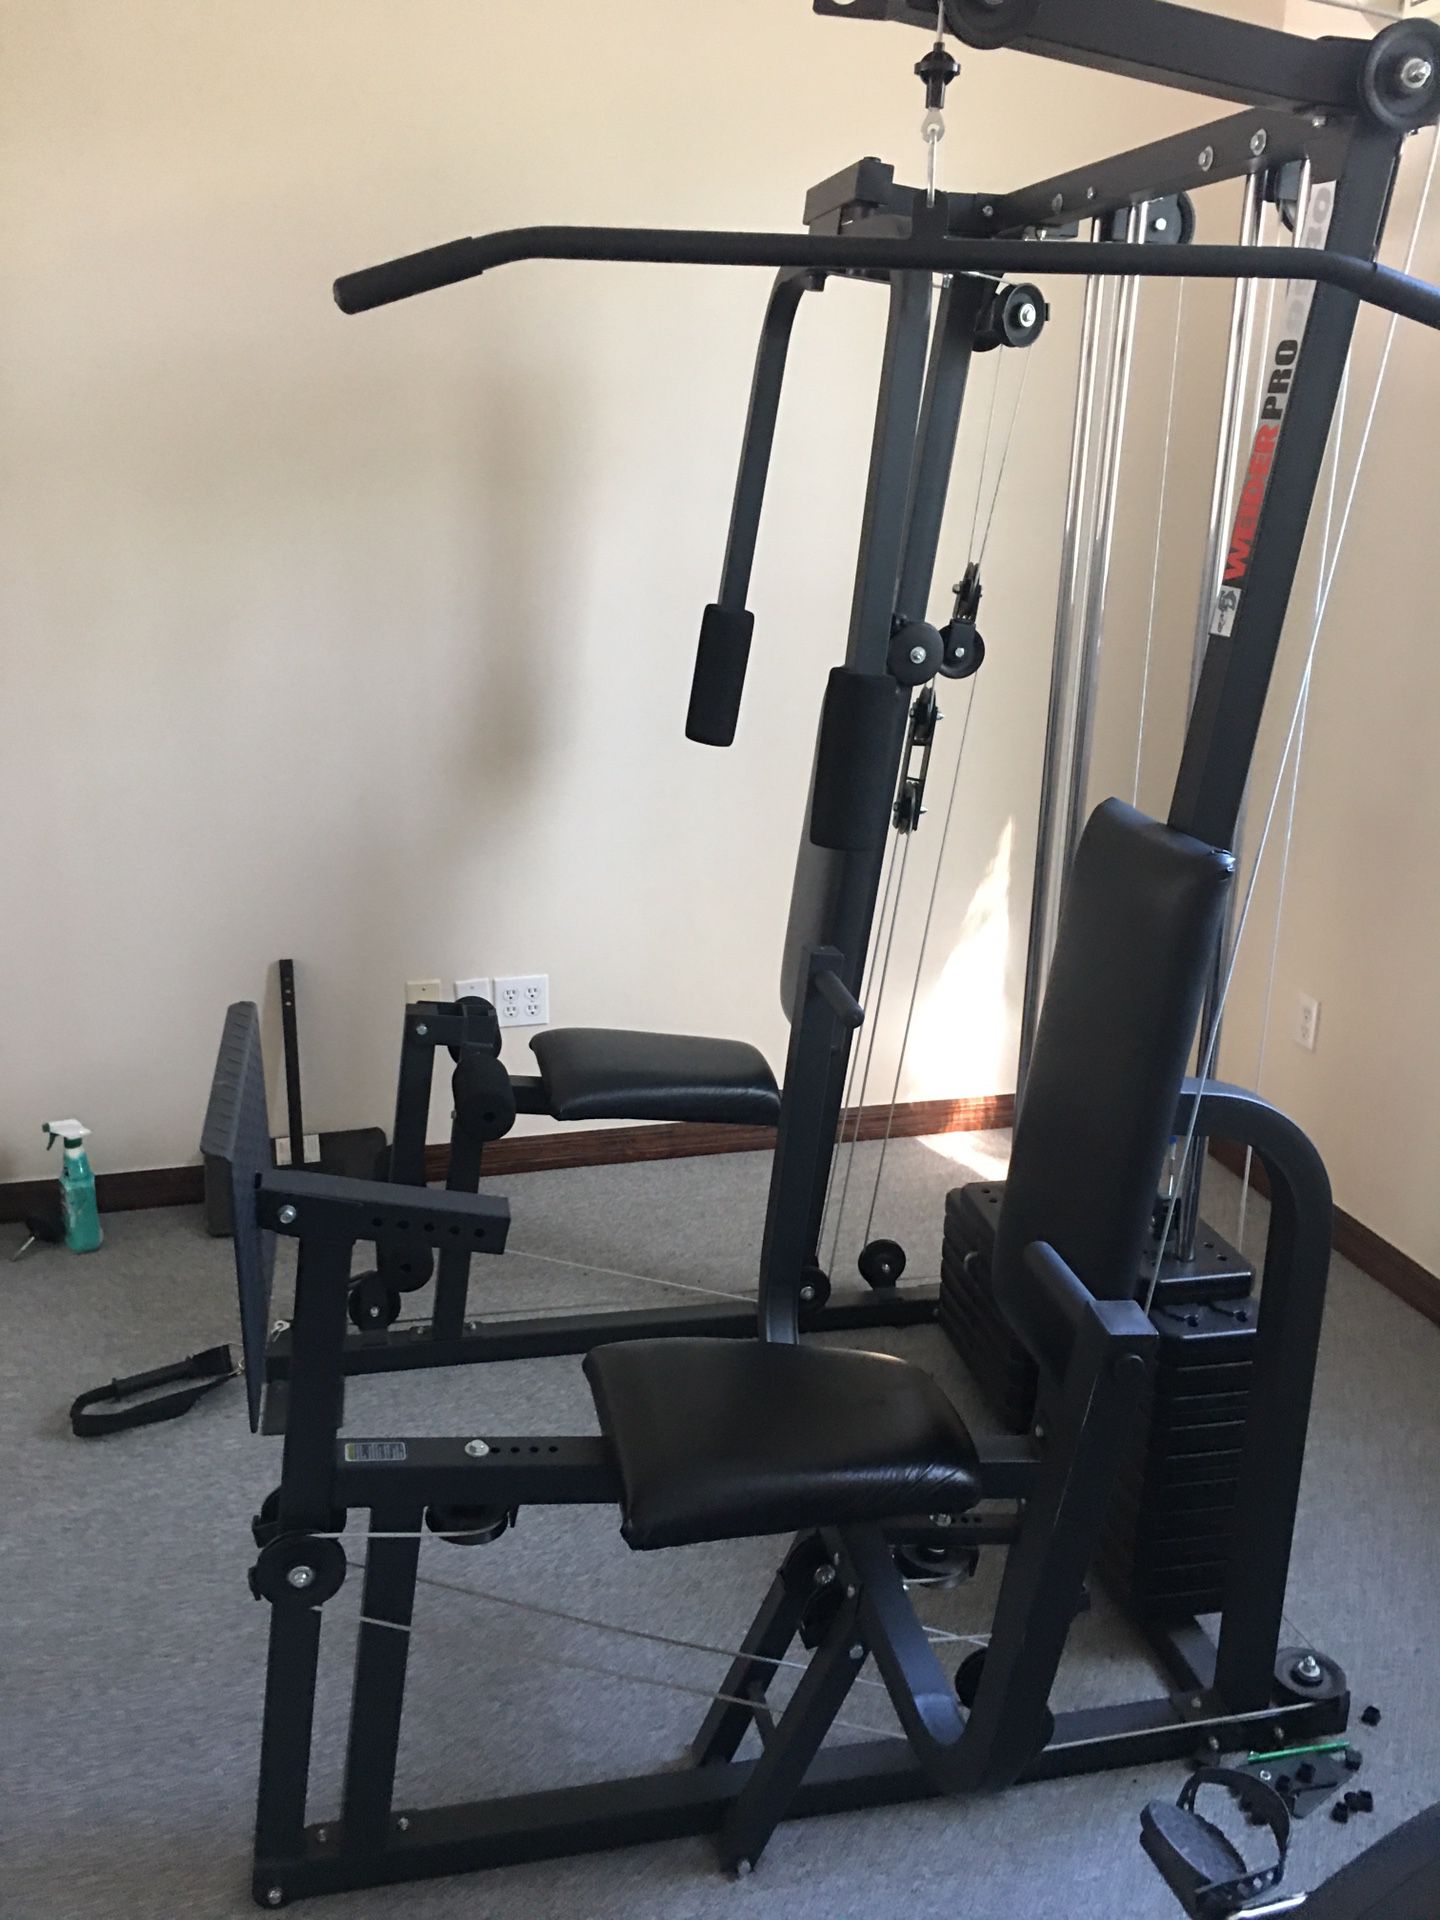 Complete gym equipment